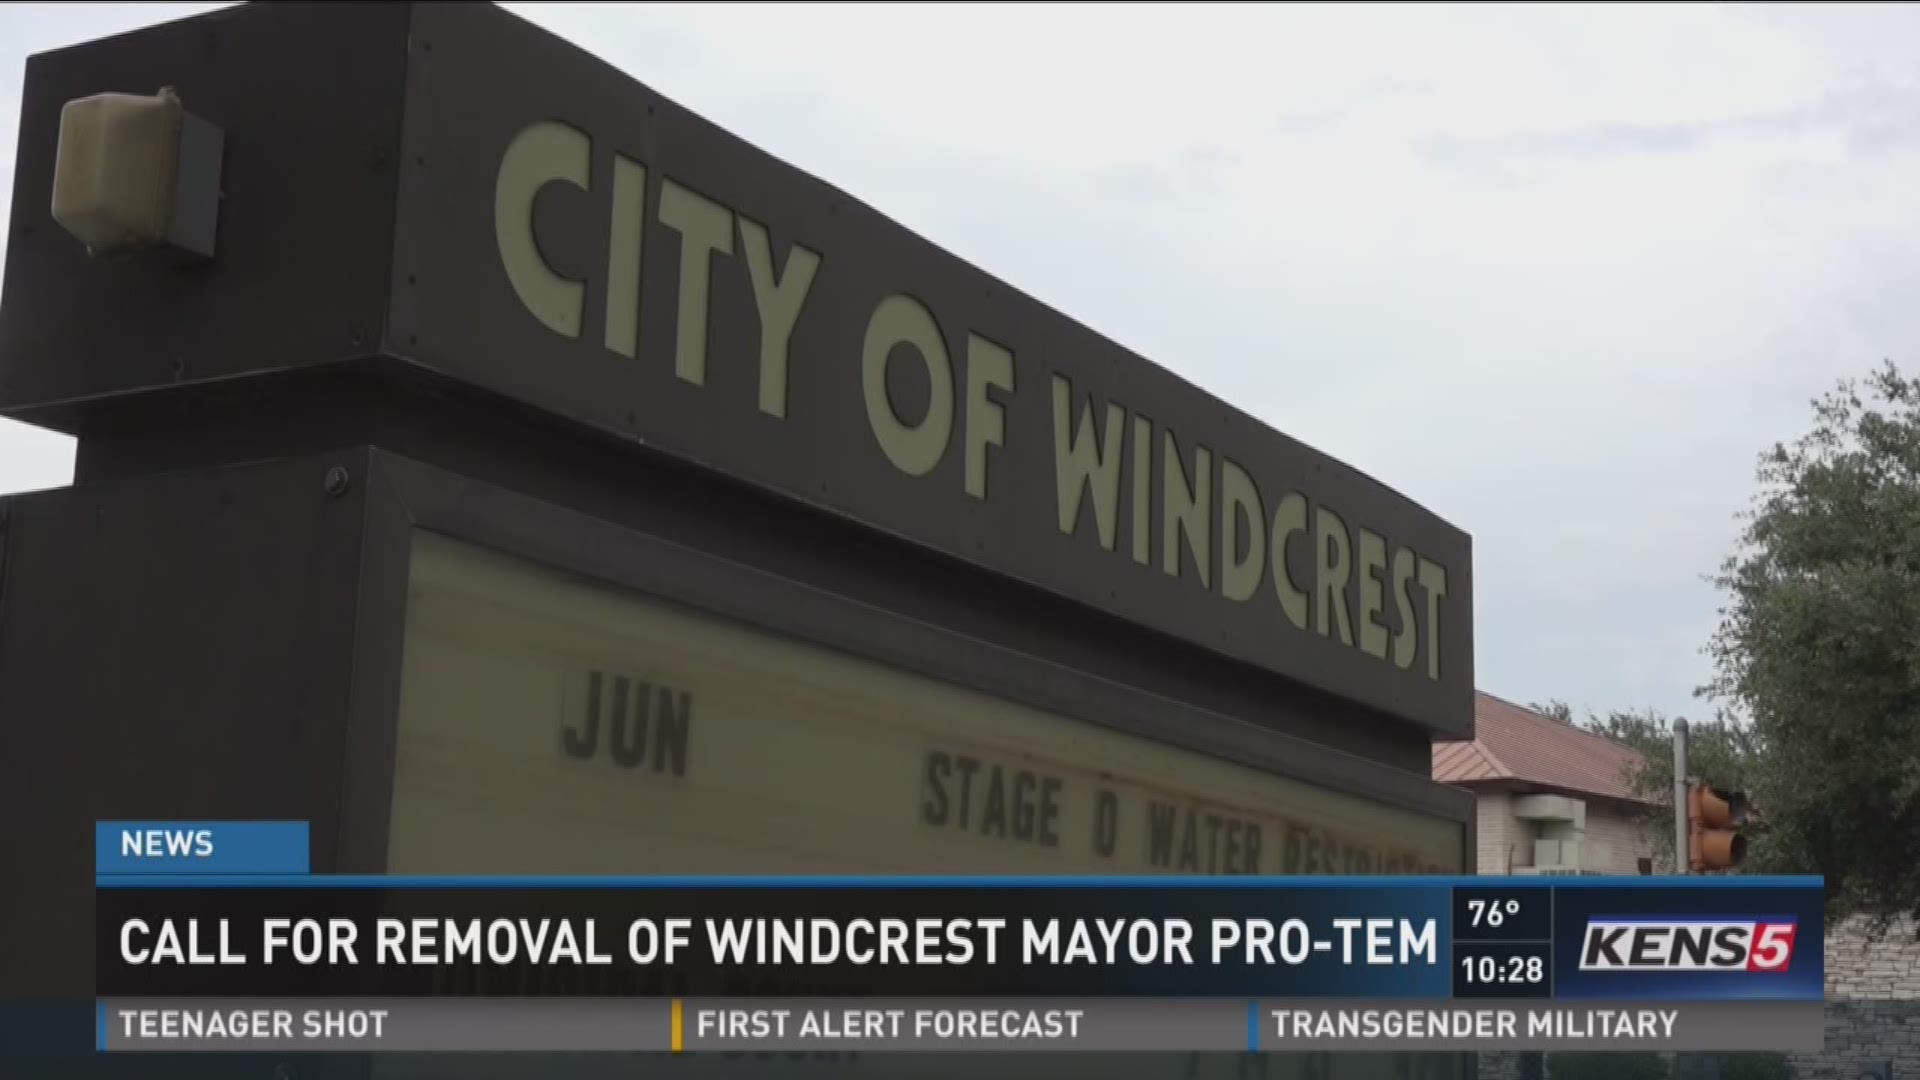 Call for removal of Windrest mayor pro-tempore